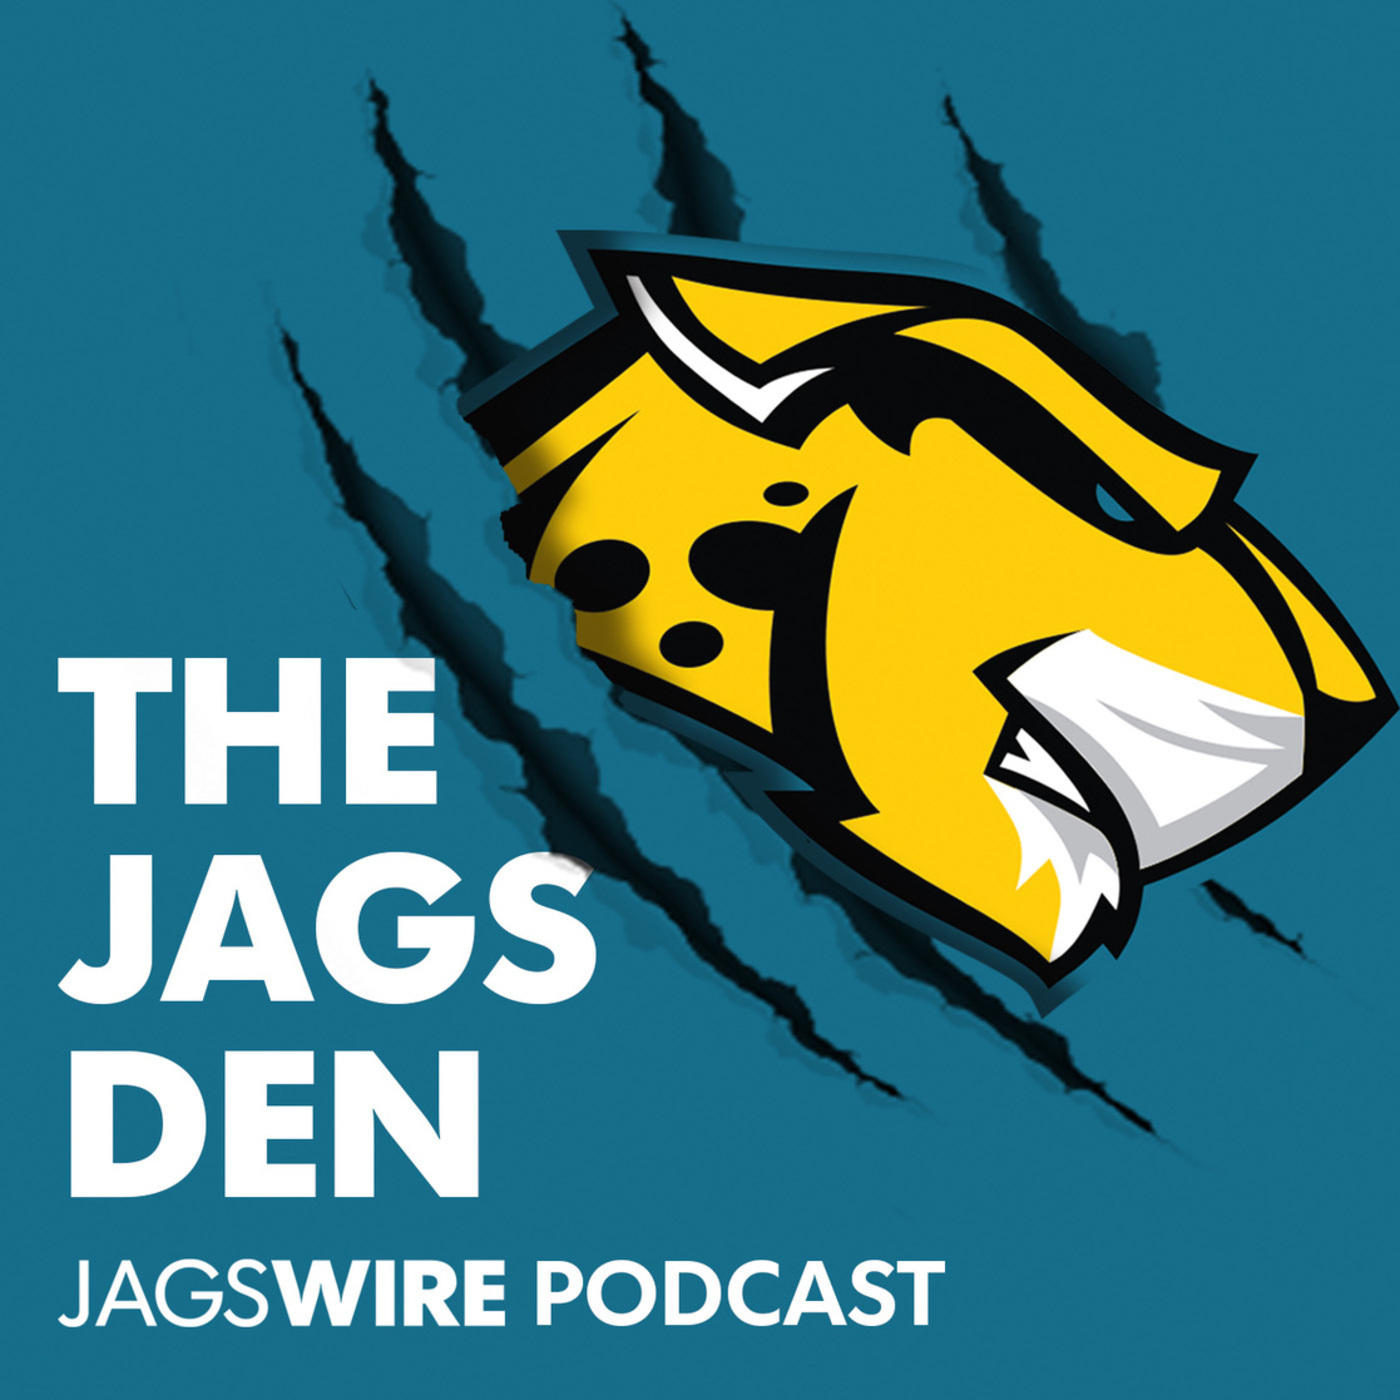 Jags Den Podcast Ep. 49: Discussions on Jags' first wave of cuts